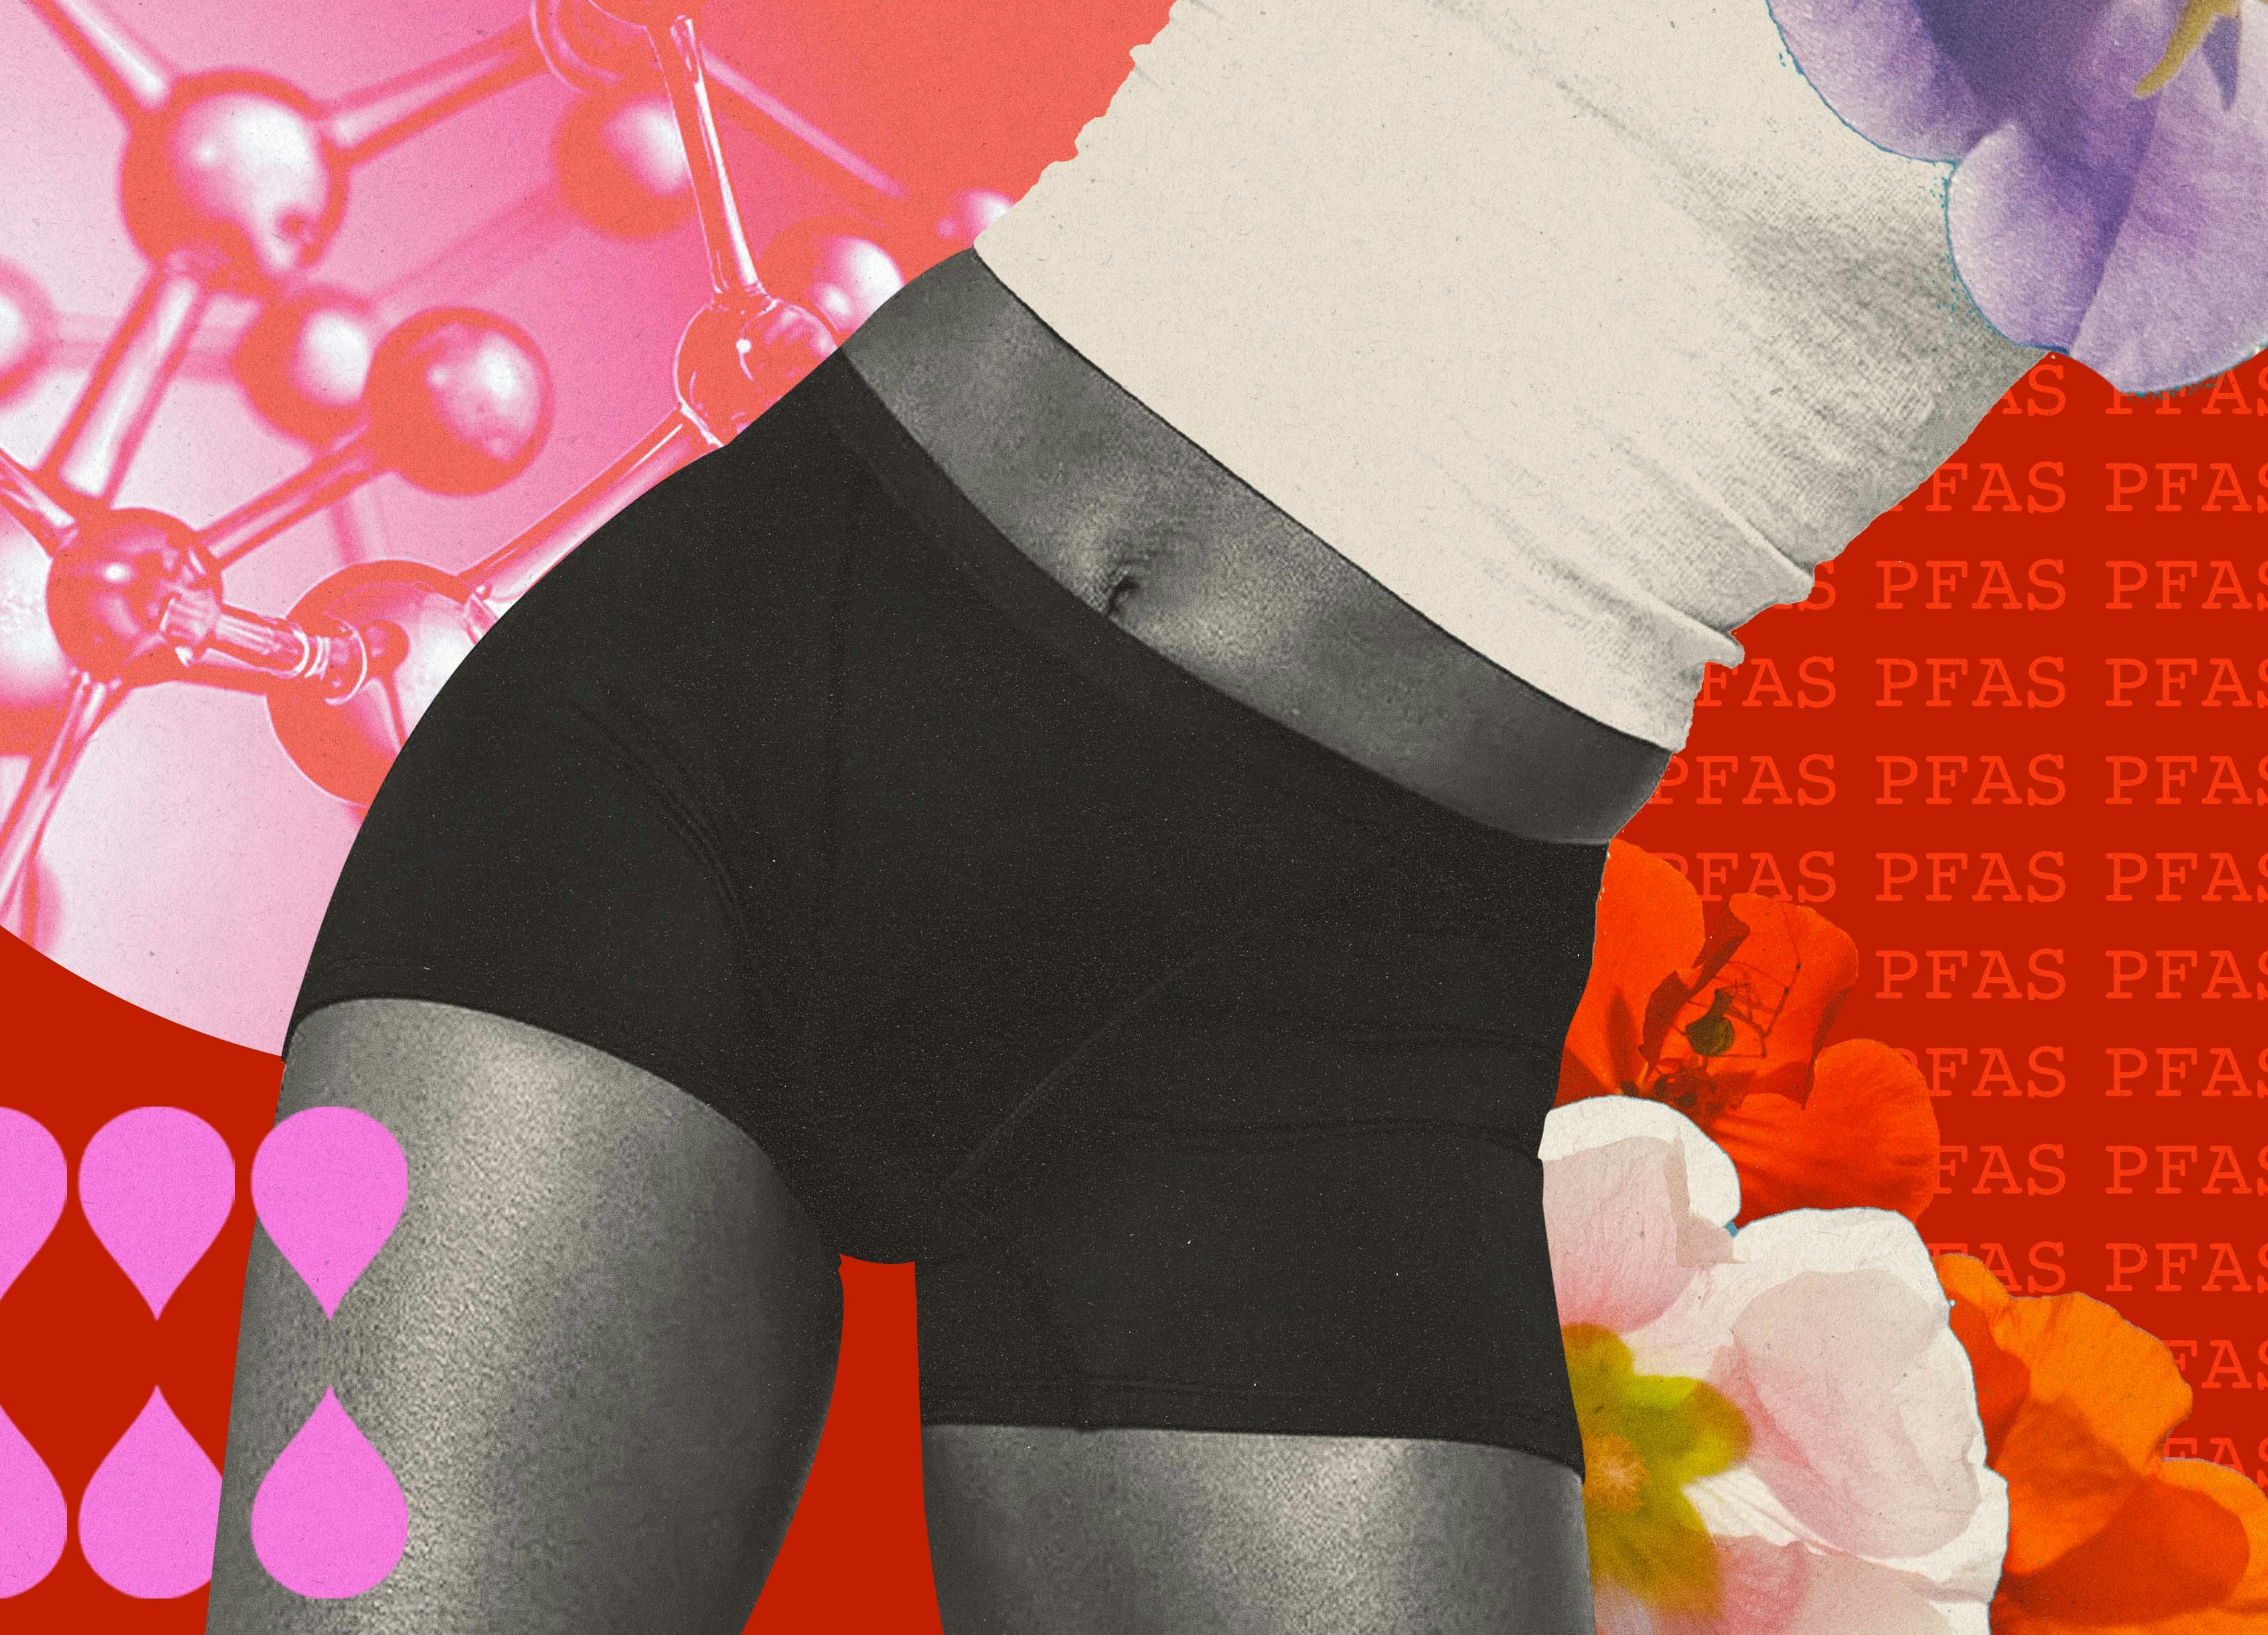 It needs a marketing U-turn': can Thinx bounce back after toxic lawsuit?